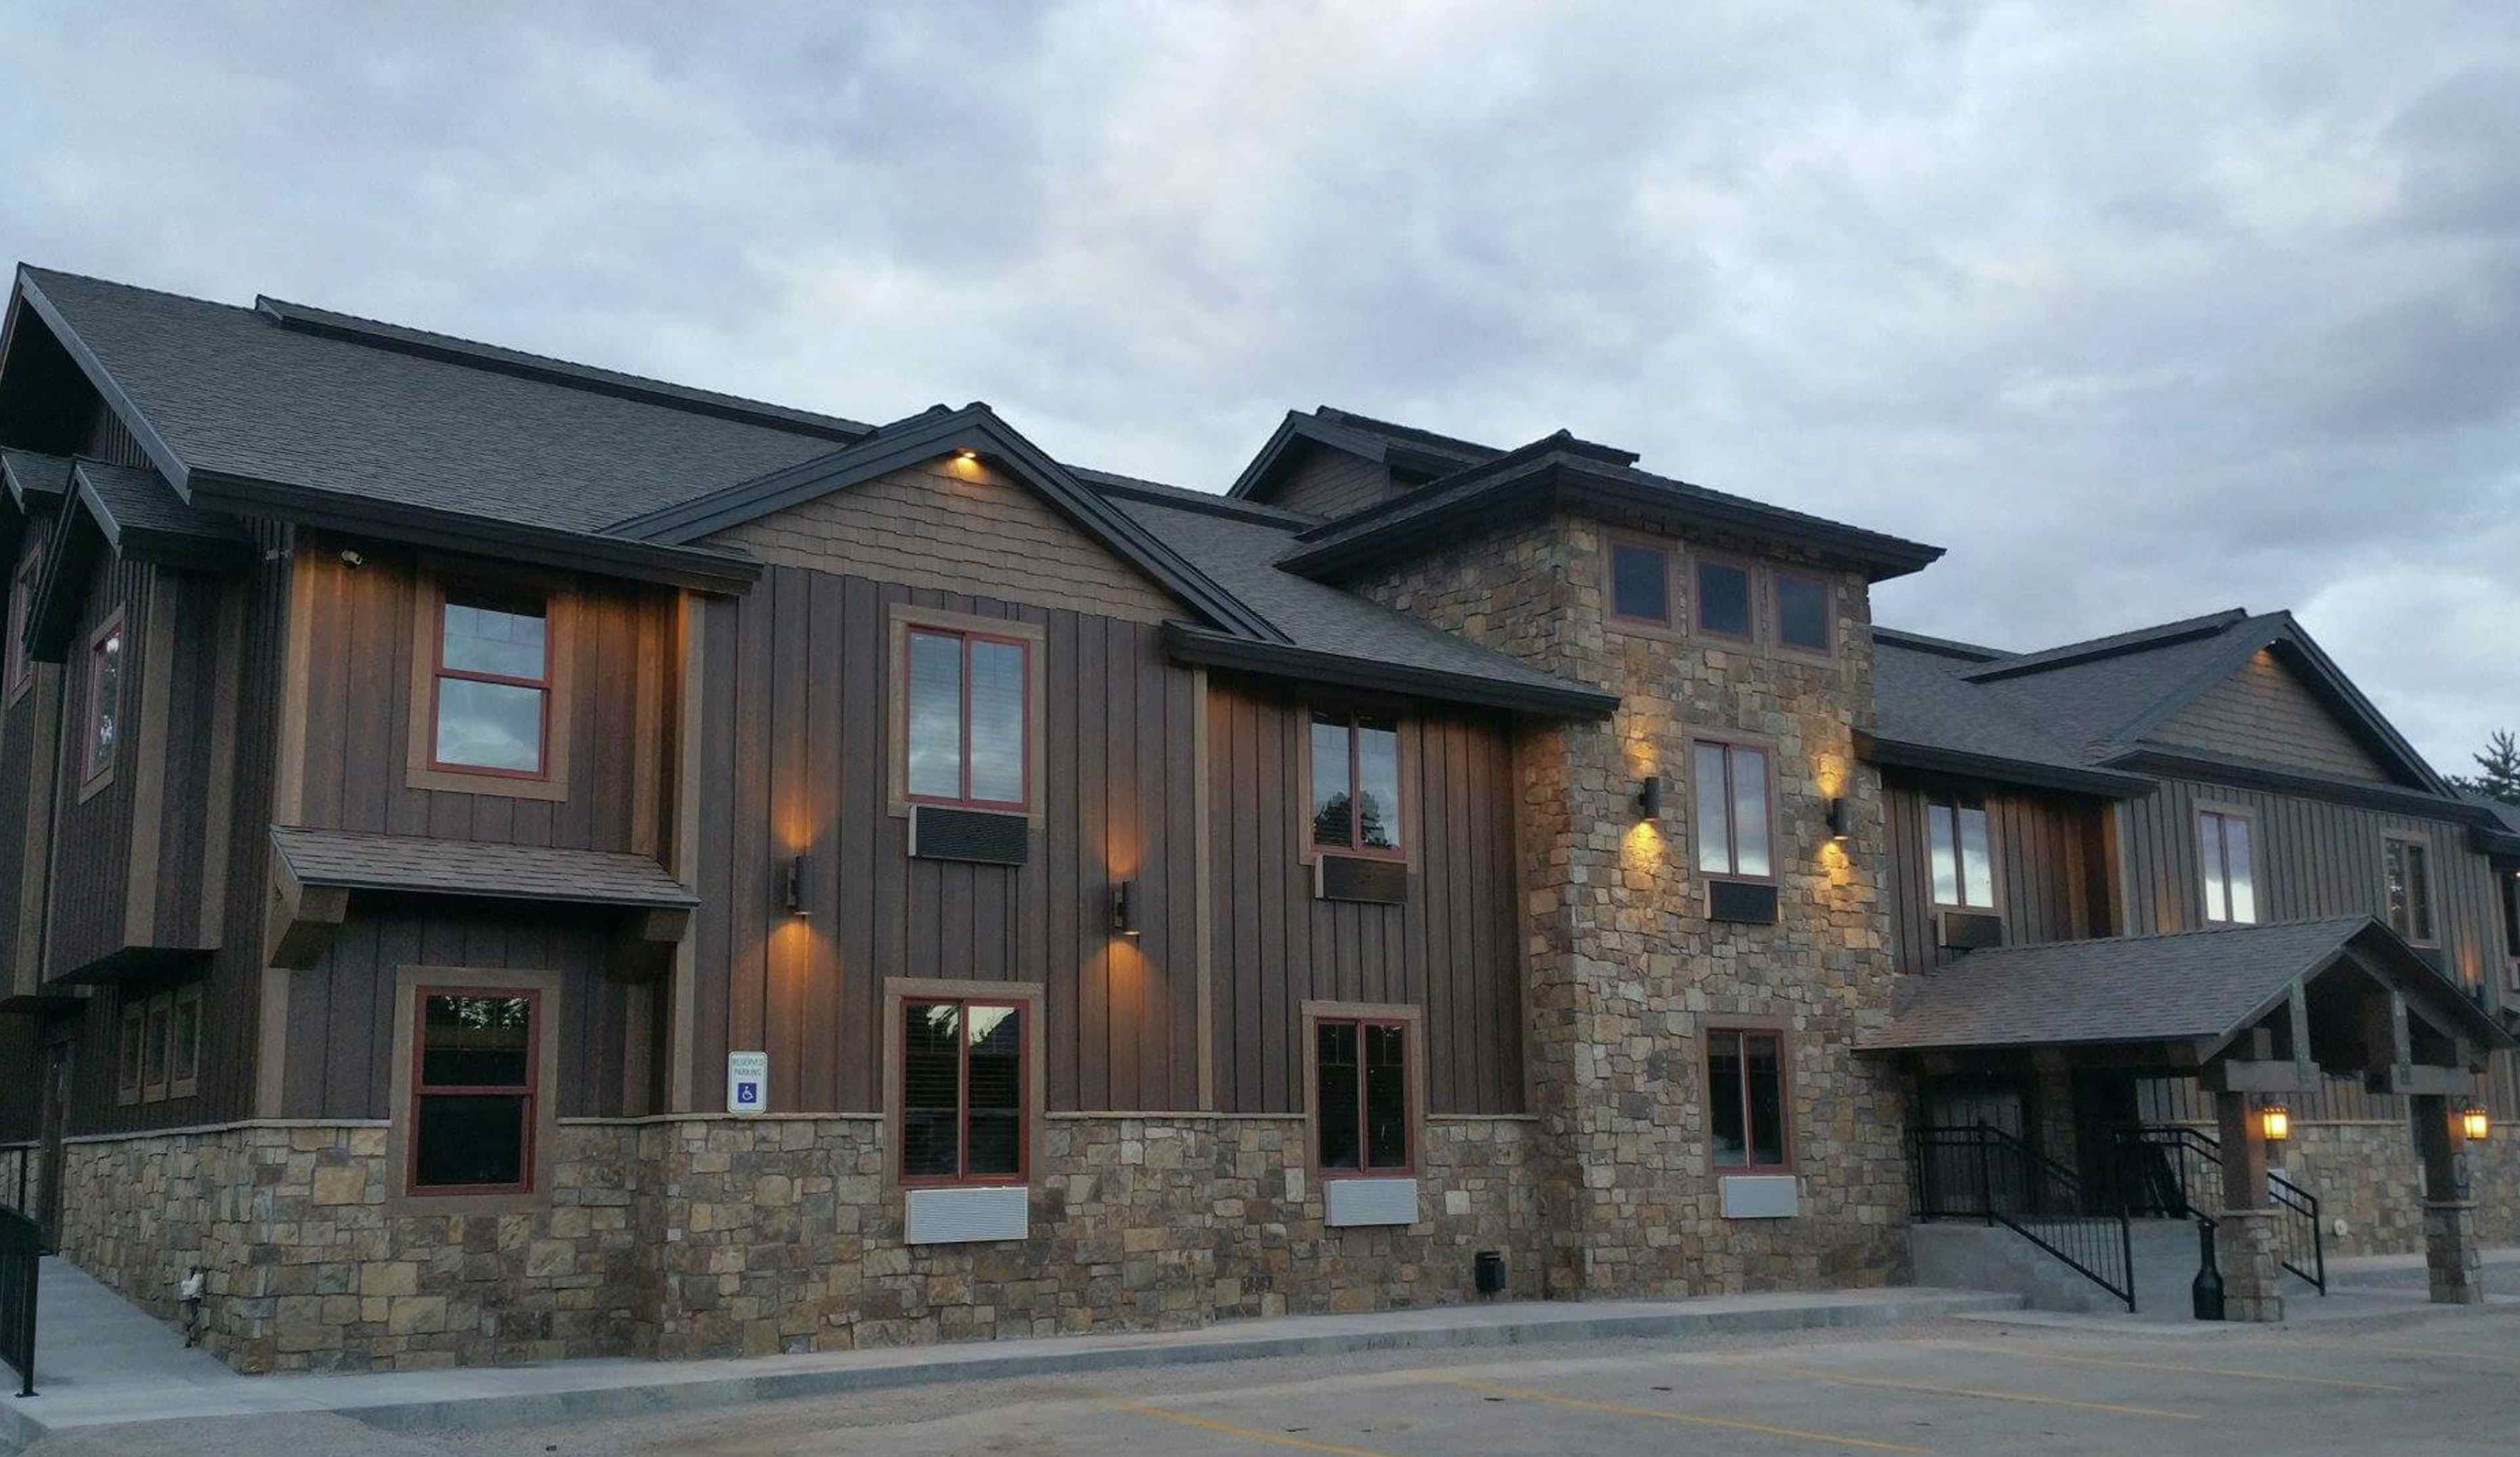 A photograph capturing an exterior view of a section of the resort on a refreshing summer night.